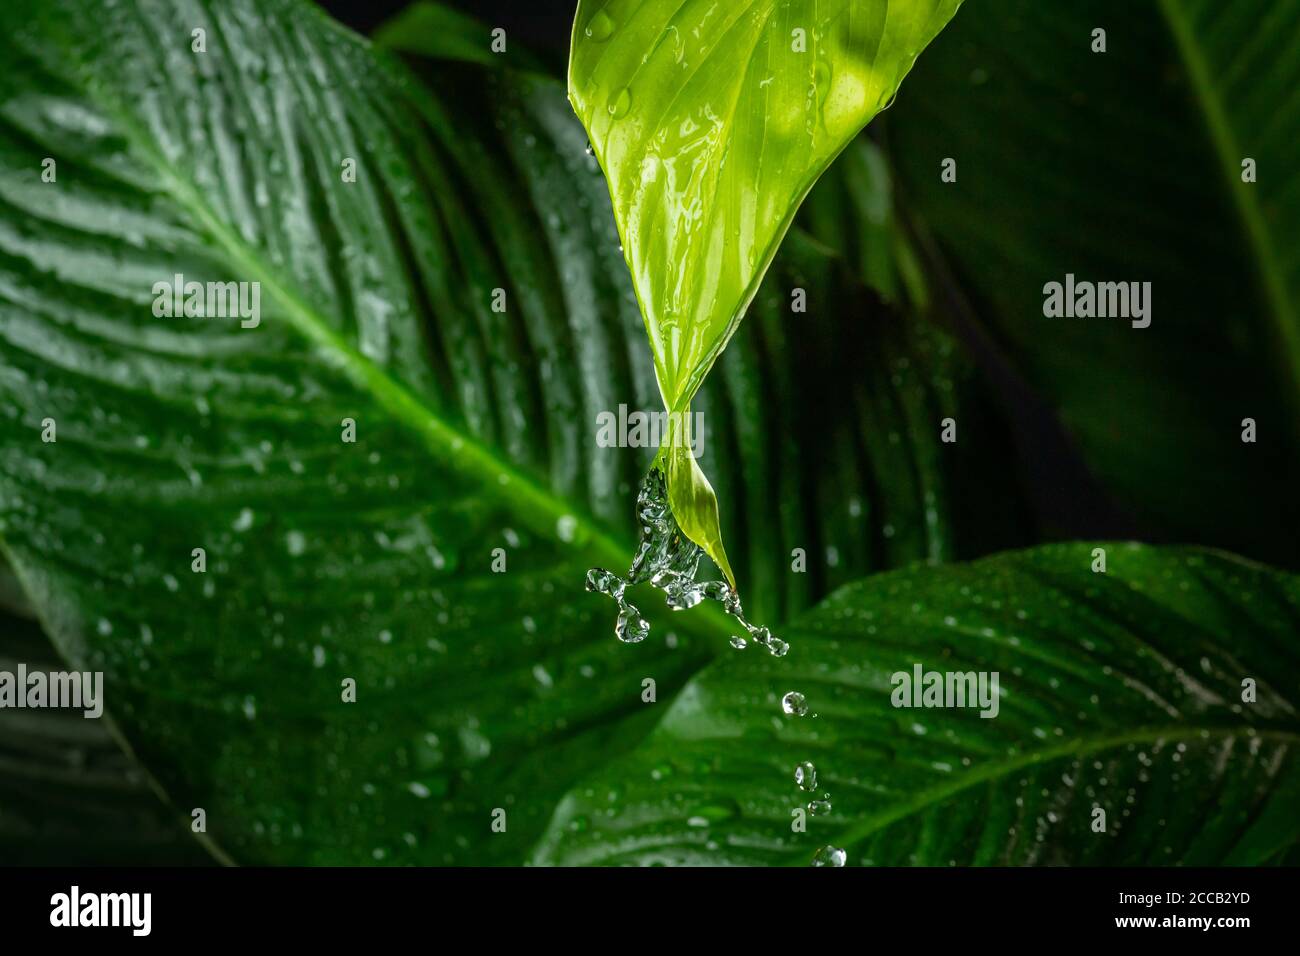 Rain water dripping off of green leaf detail Stock Photo